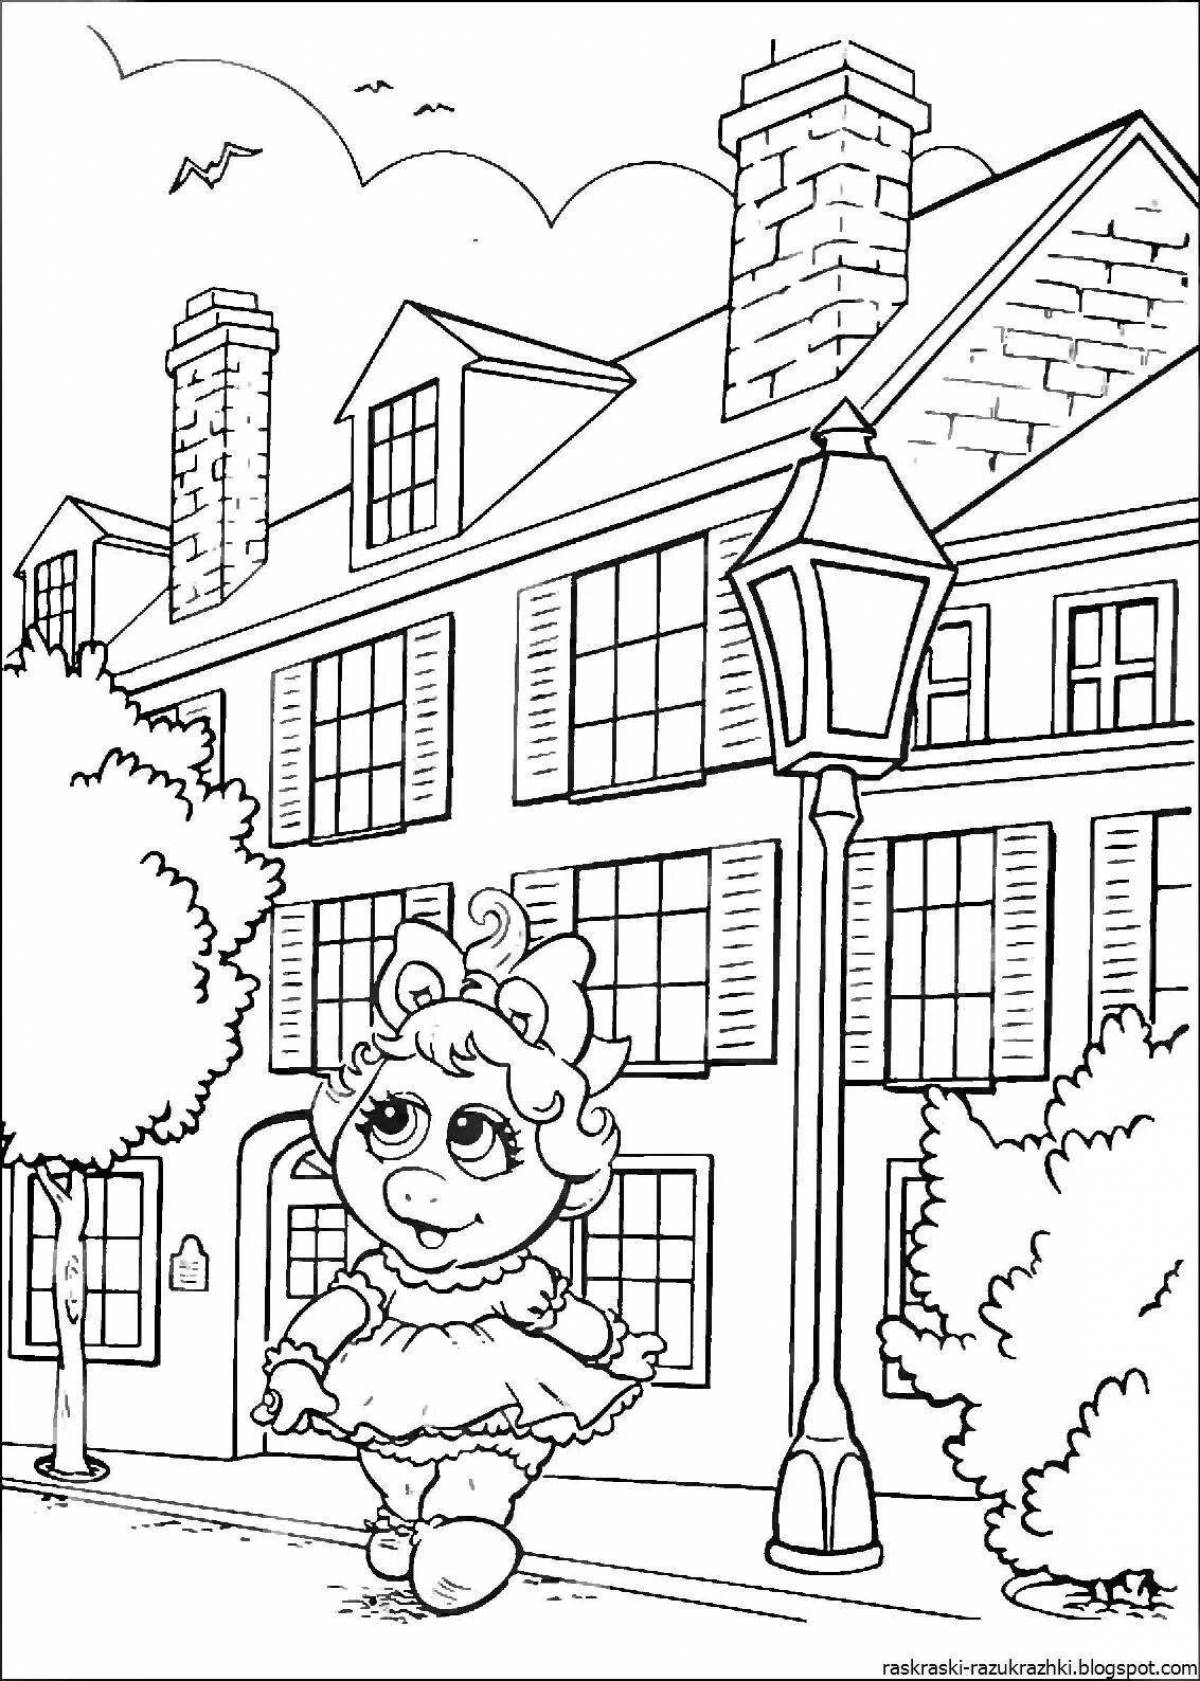 Wonderful city street coloring pages for kids